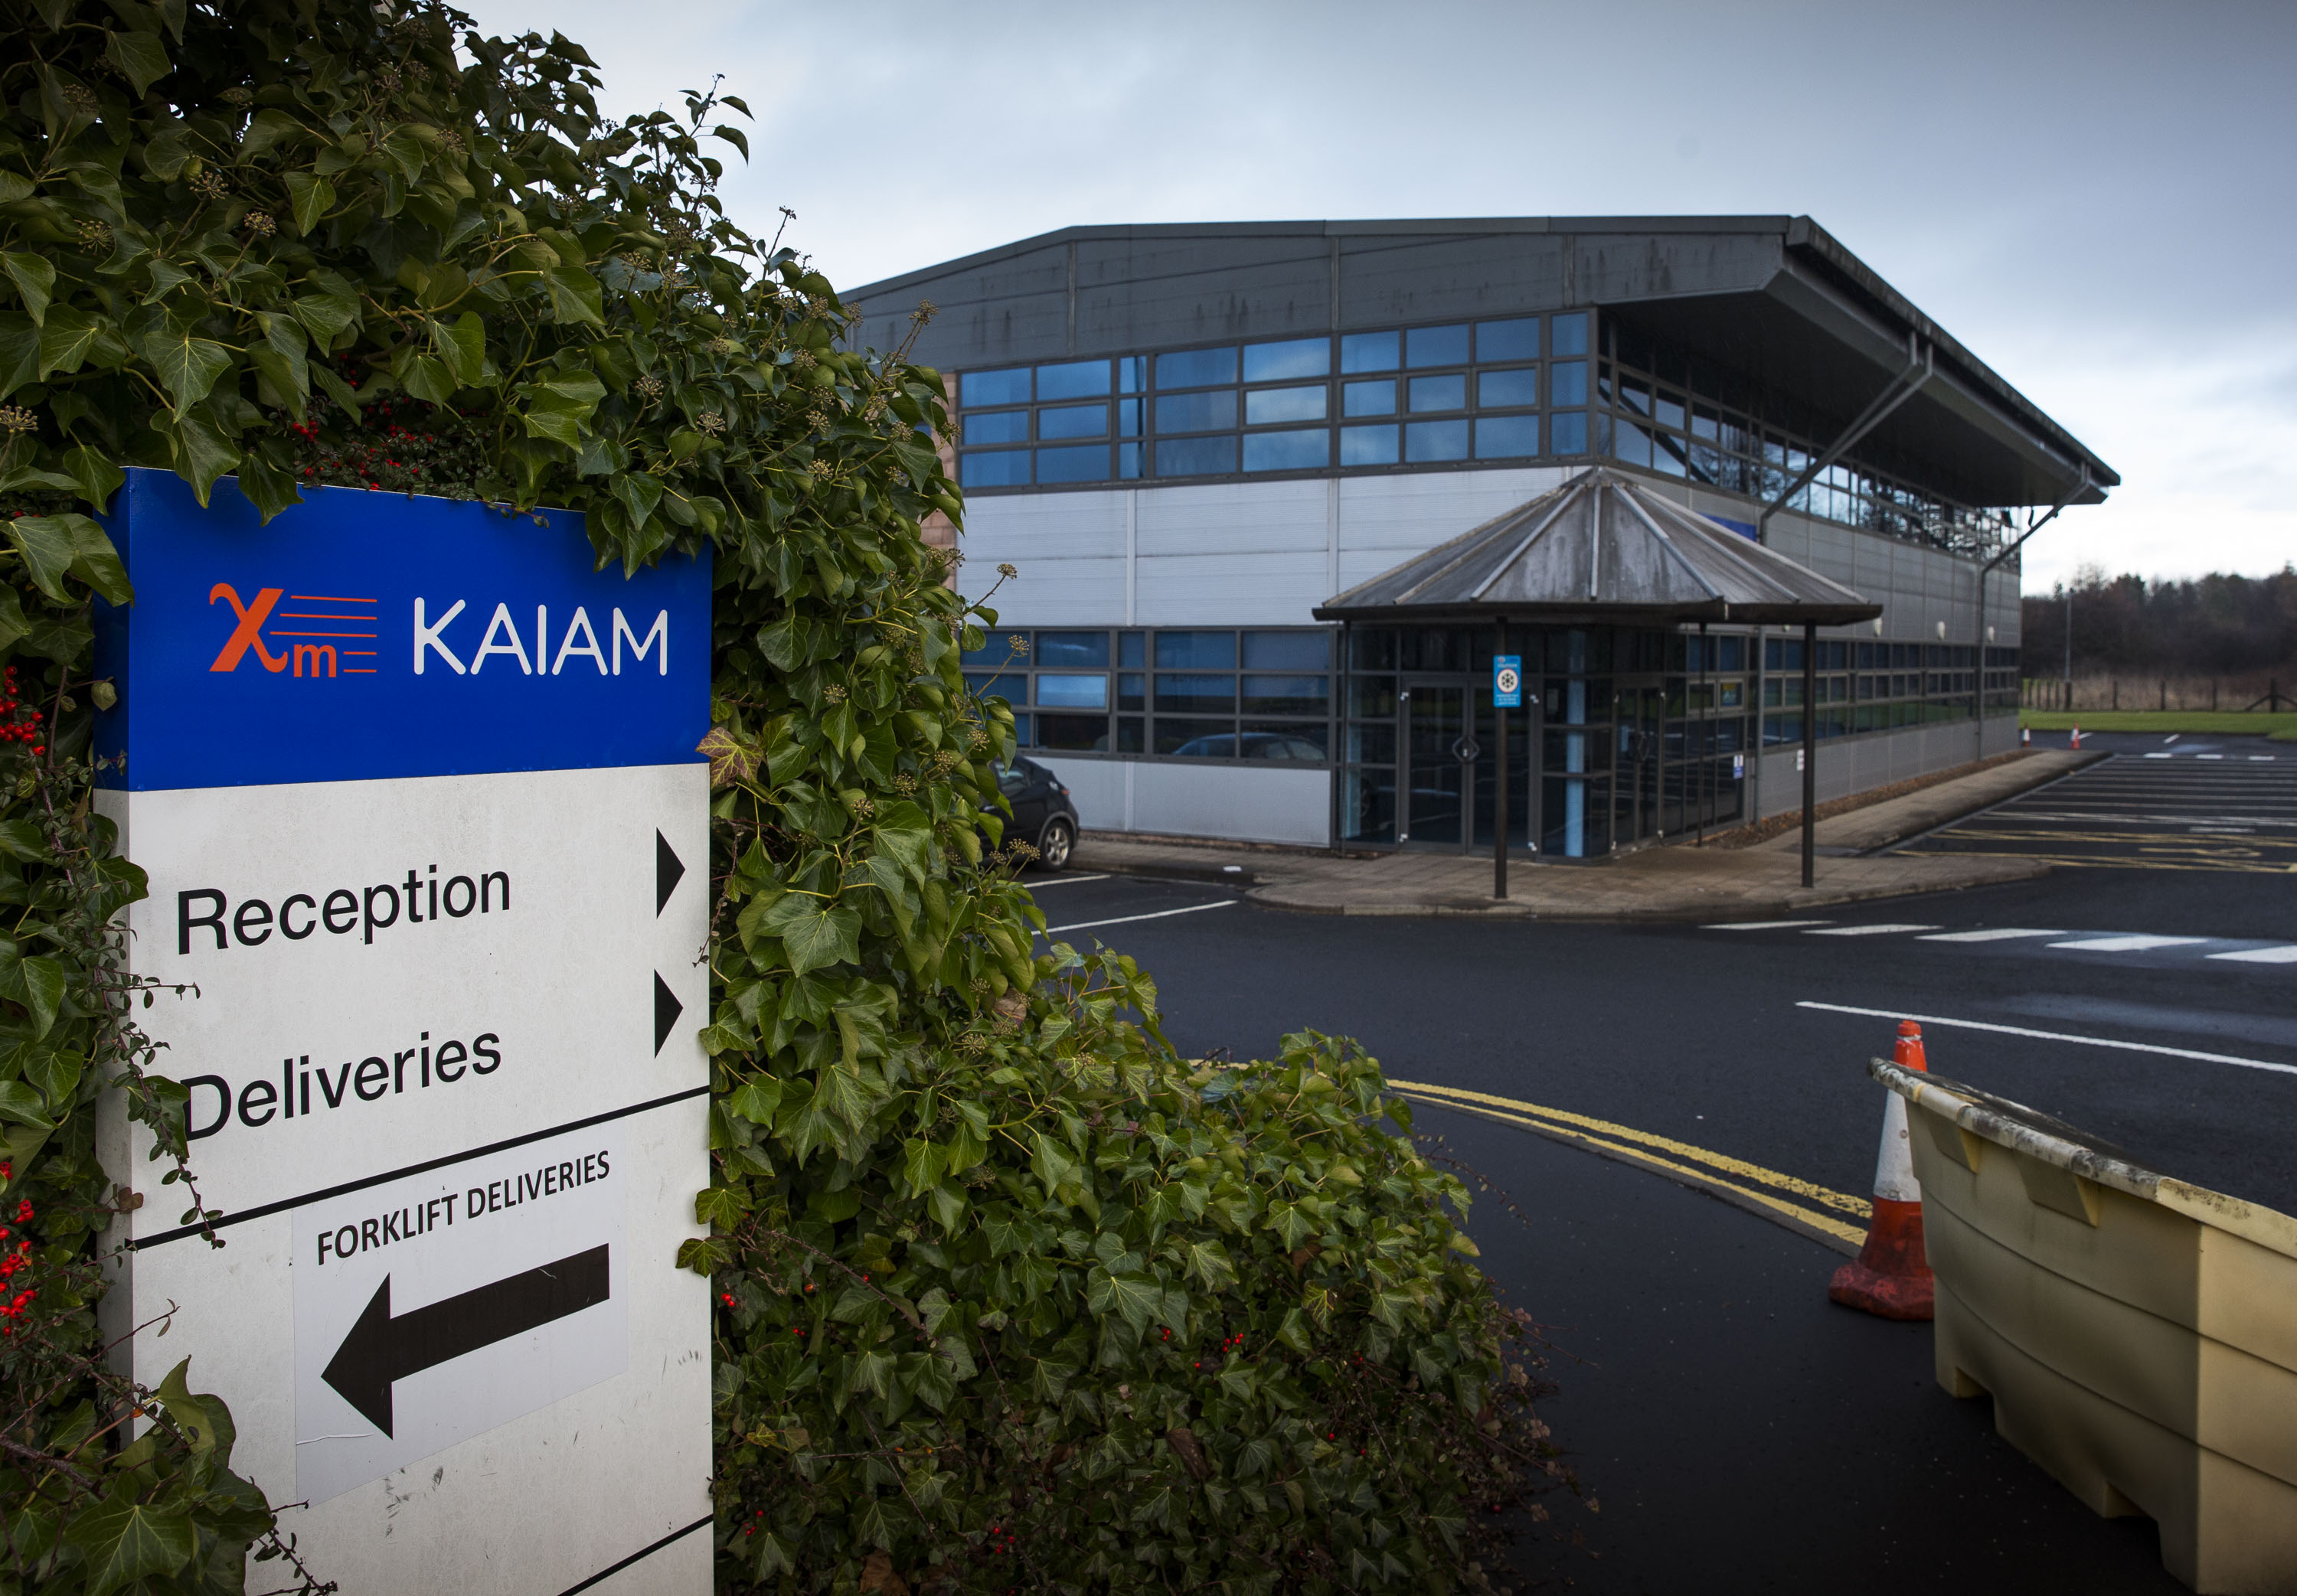 Kaiam's offices in Livingston where 300 staff were laid off